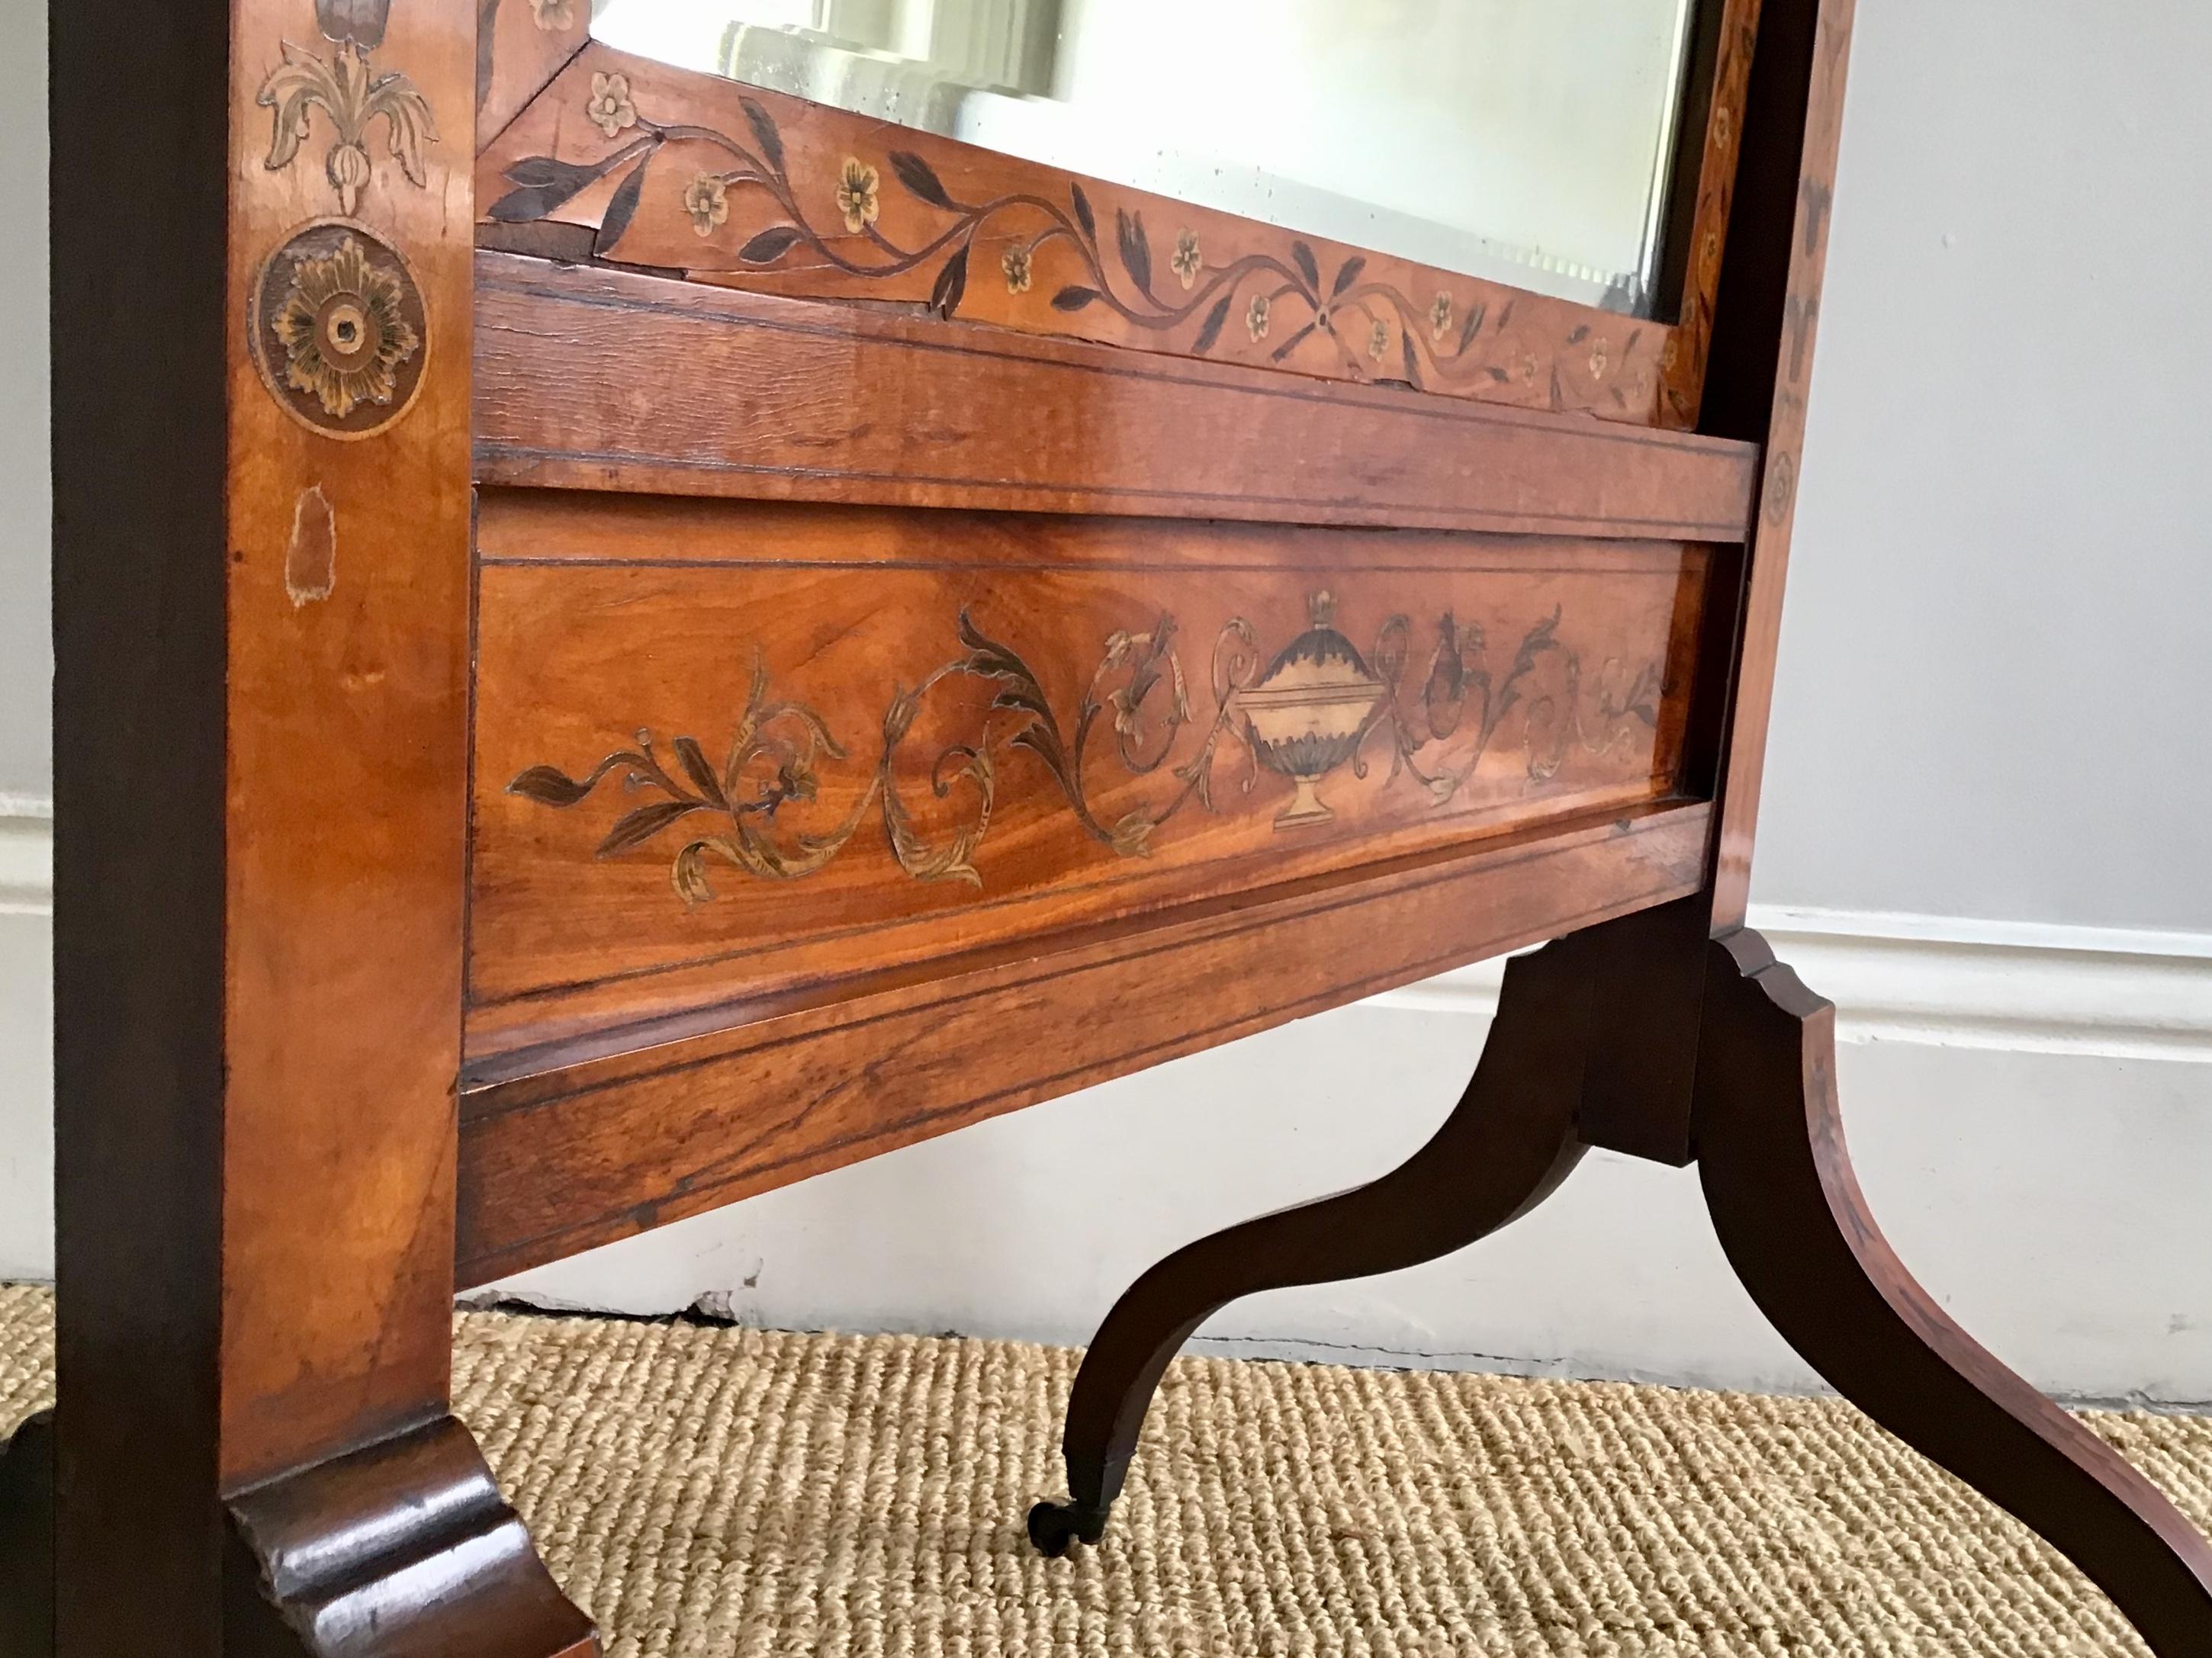 19th century satinwood with all over scroll and foliate marquetry in Harewood boxwood and purple heart with pen work highlights
The bevelled swing mirror adjustable for angle with original gilt metal knobs. The corners of swan neck form the four